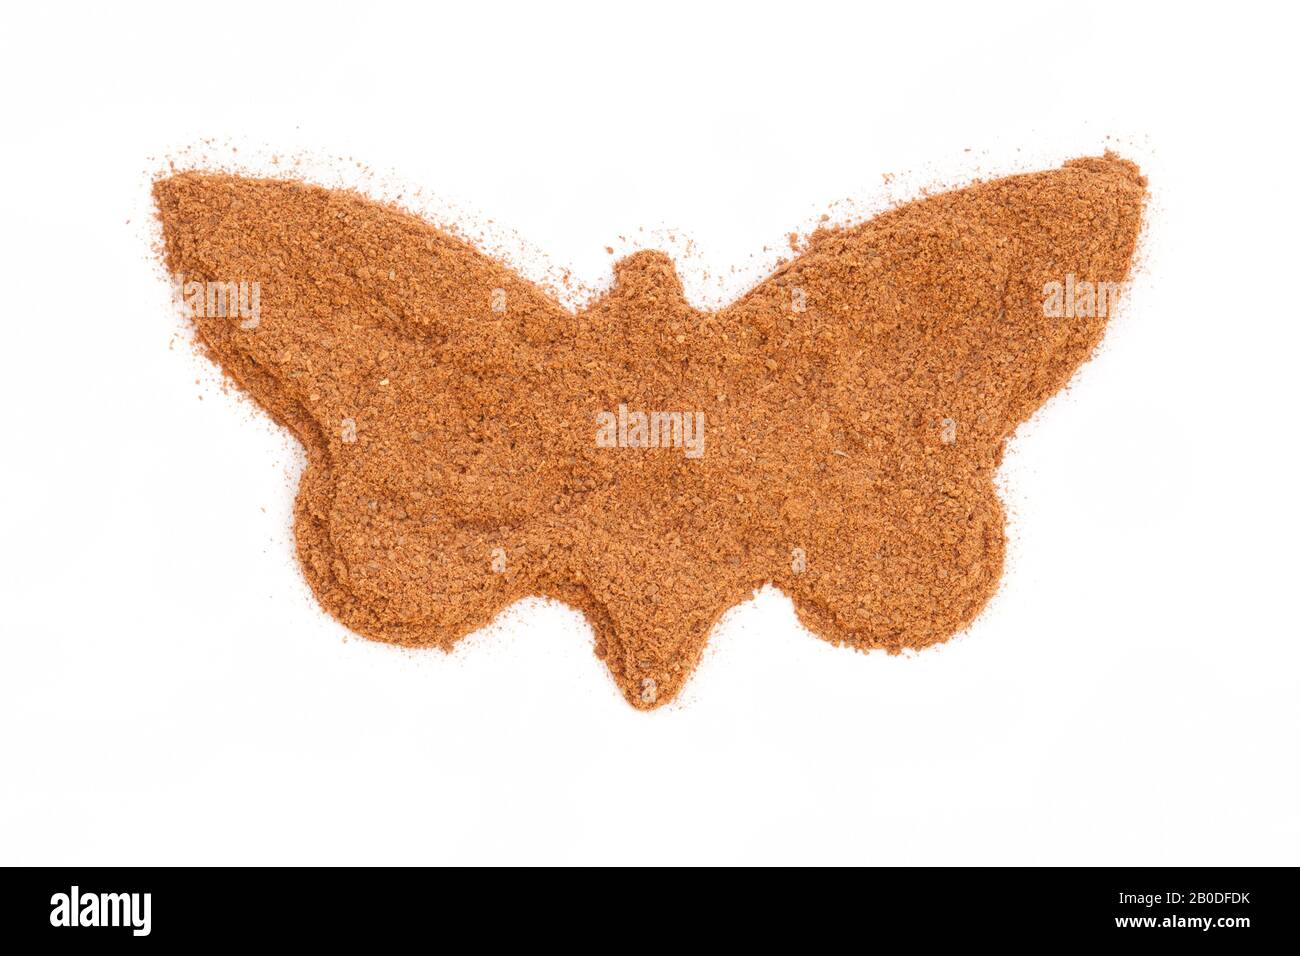 Heap of ground Cinnamon isolated in butterfly shape on white background.  As a spice or condiment cinnamon sold in the form of sticks or a hammer. Stock Photo